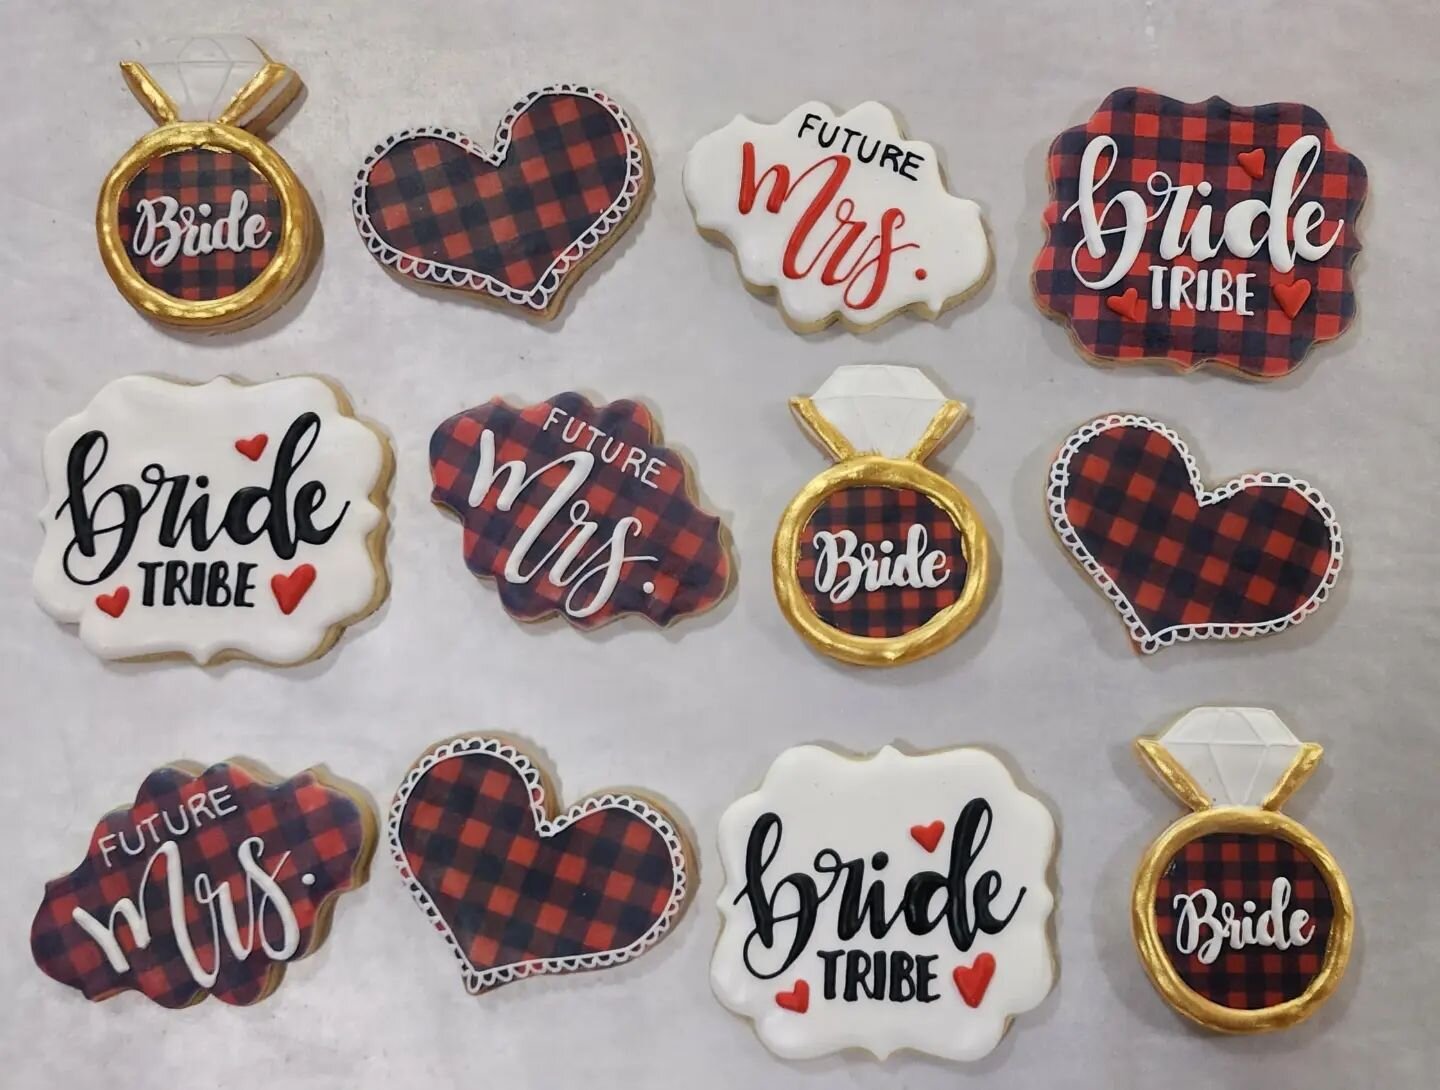 Bride to be! 
The last flannel before the ring! 
There's been so many fun themed parties lately. 🙊😬 

#bridetobe #bachelorette #maidofhonor #bride #plaid #bachelorettecookies #cookiesofinstagram #decoratedcookies #sugarcookies #cookies #yyctoday #a